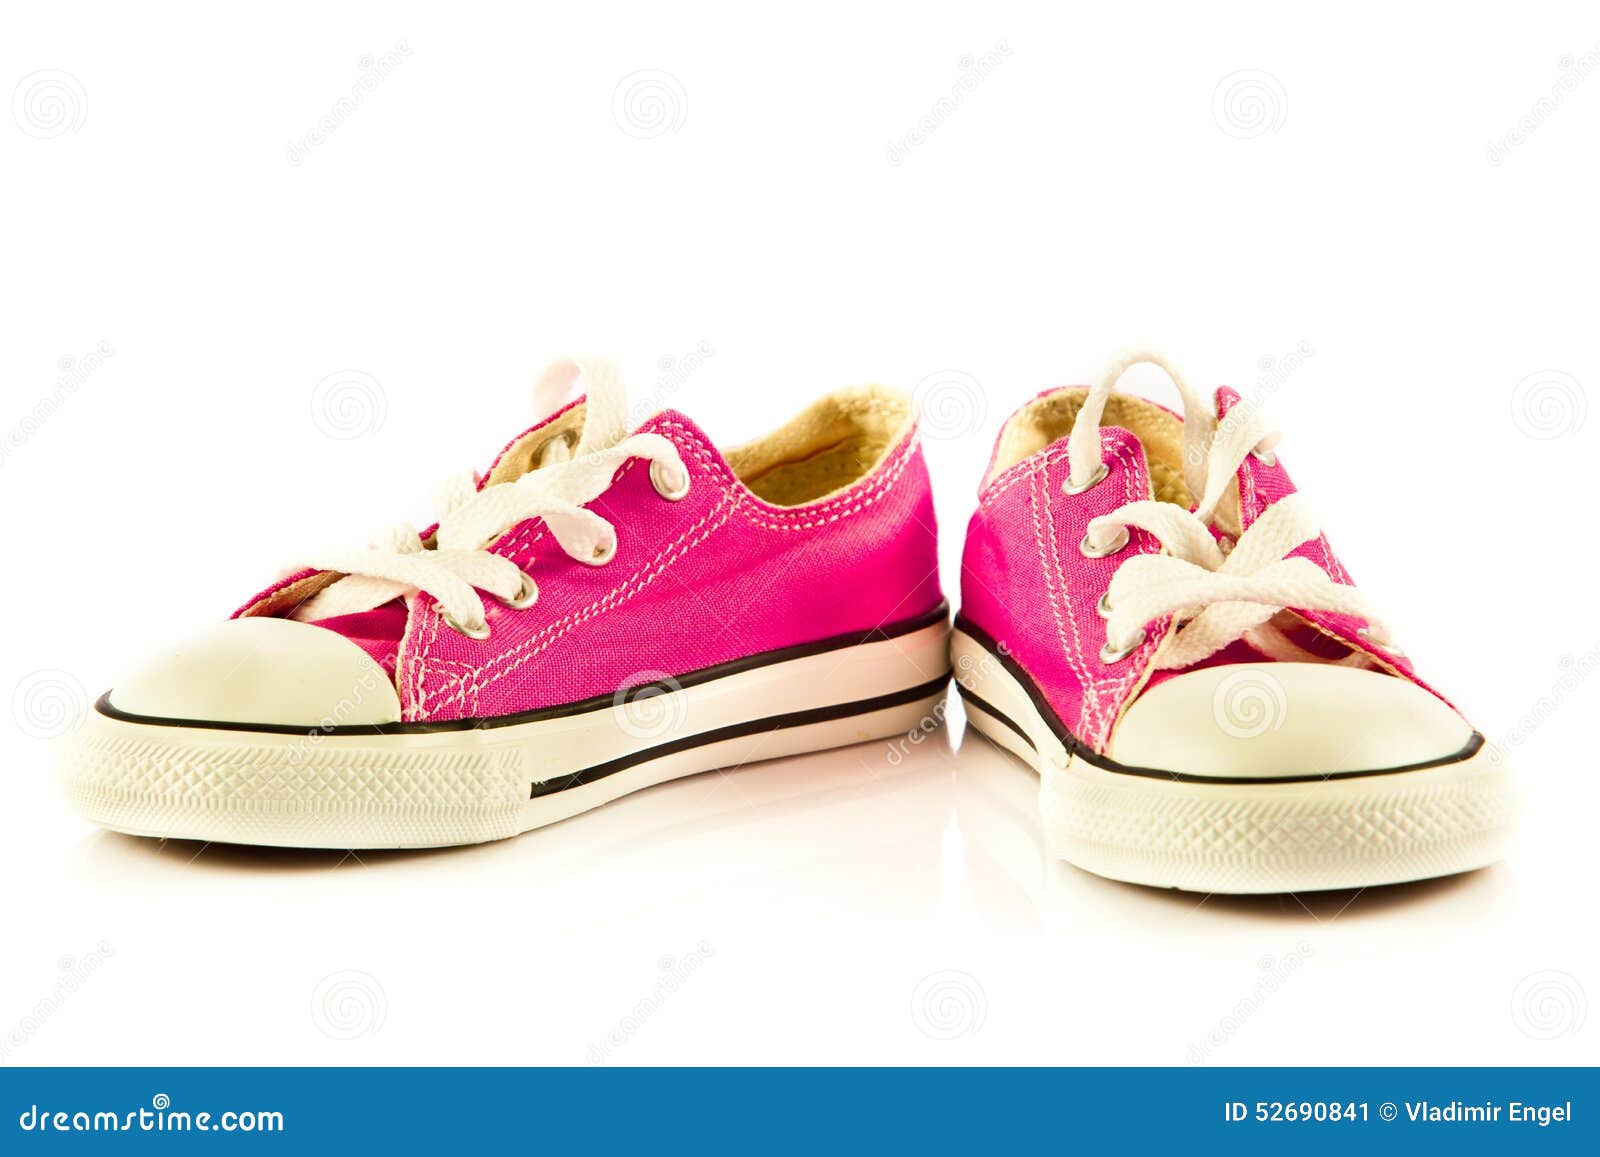 Children Shoes Isolated On White Background. Freestyle Comfort ...